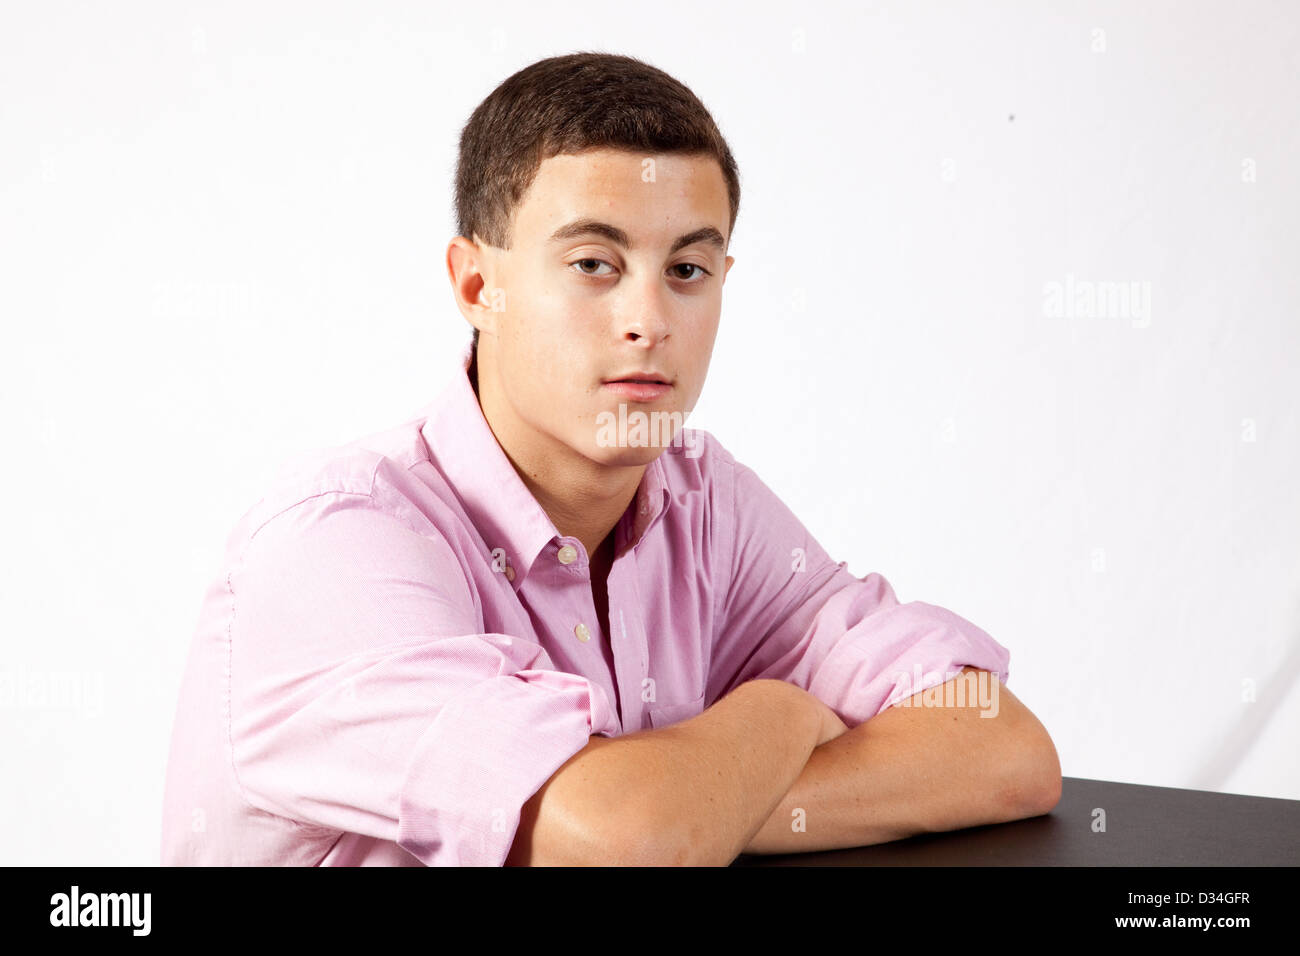 Teenage boy looking at the camera with a thoughtful, pensive look and direct eye contact Stock Photo